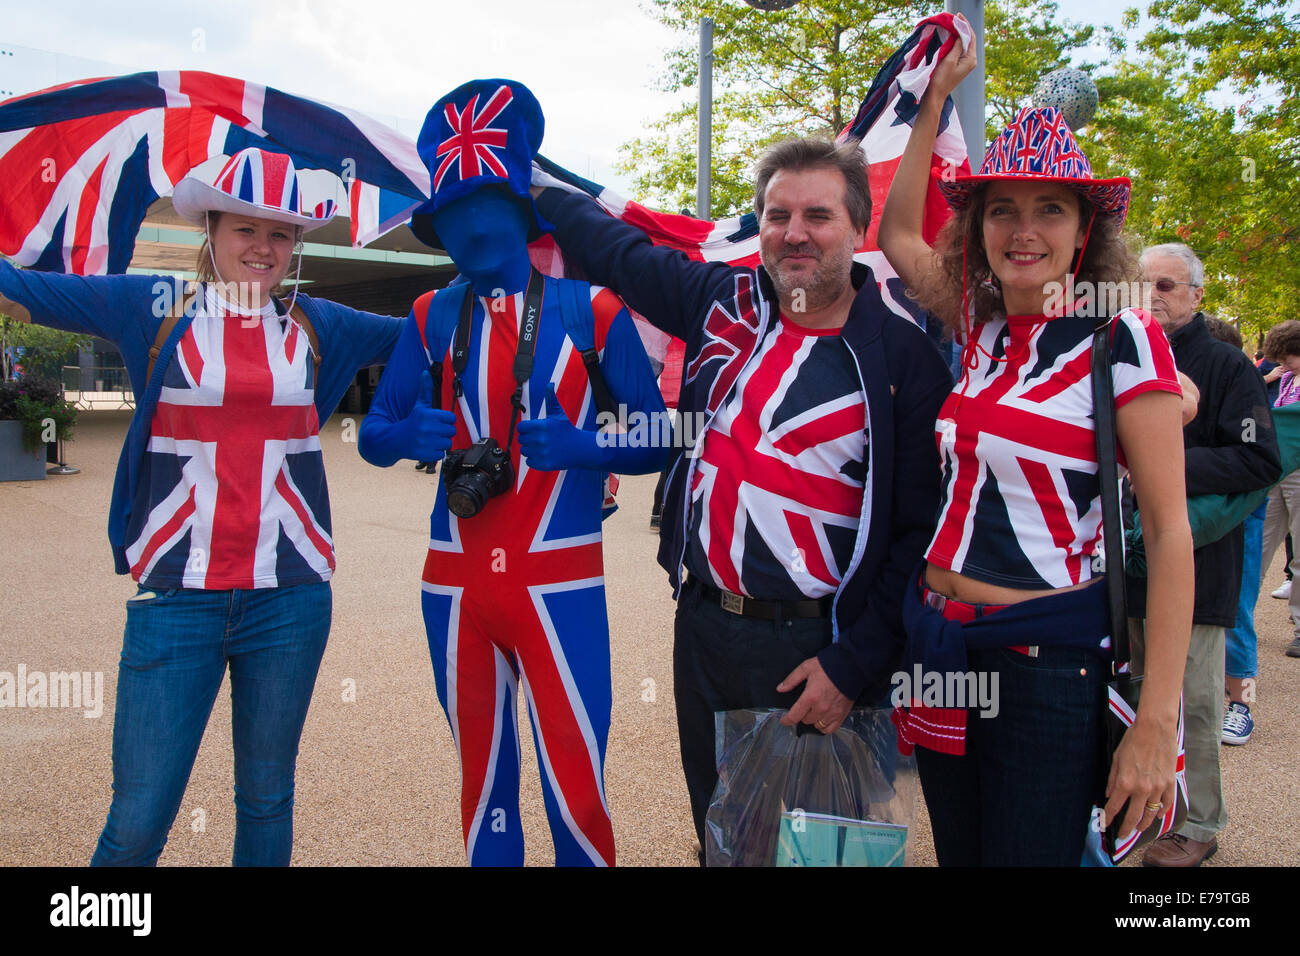 Queen Elizabeth Olympic Park, London, UK. 10th Sep, 2014. The McCarron Family show their colours ahead of the opening ceremony for the Invictus Games, where over 400 competitors from 13 nations will take part in an international sporting event for wounded, injured and sick Servicemen and women. Credit:  Paul Davey/Alamy Live News Stock Photo